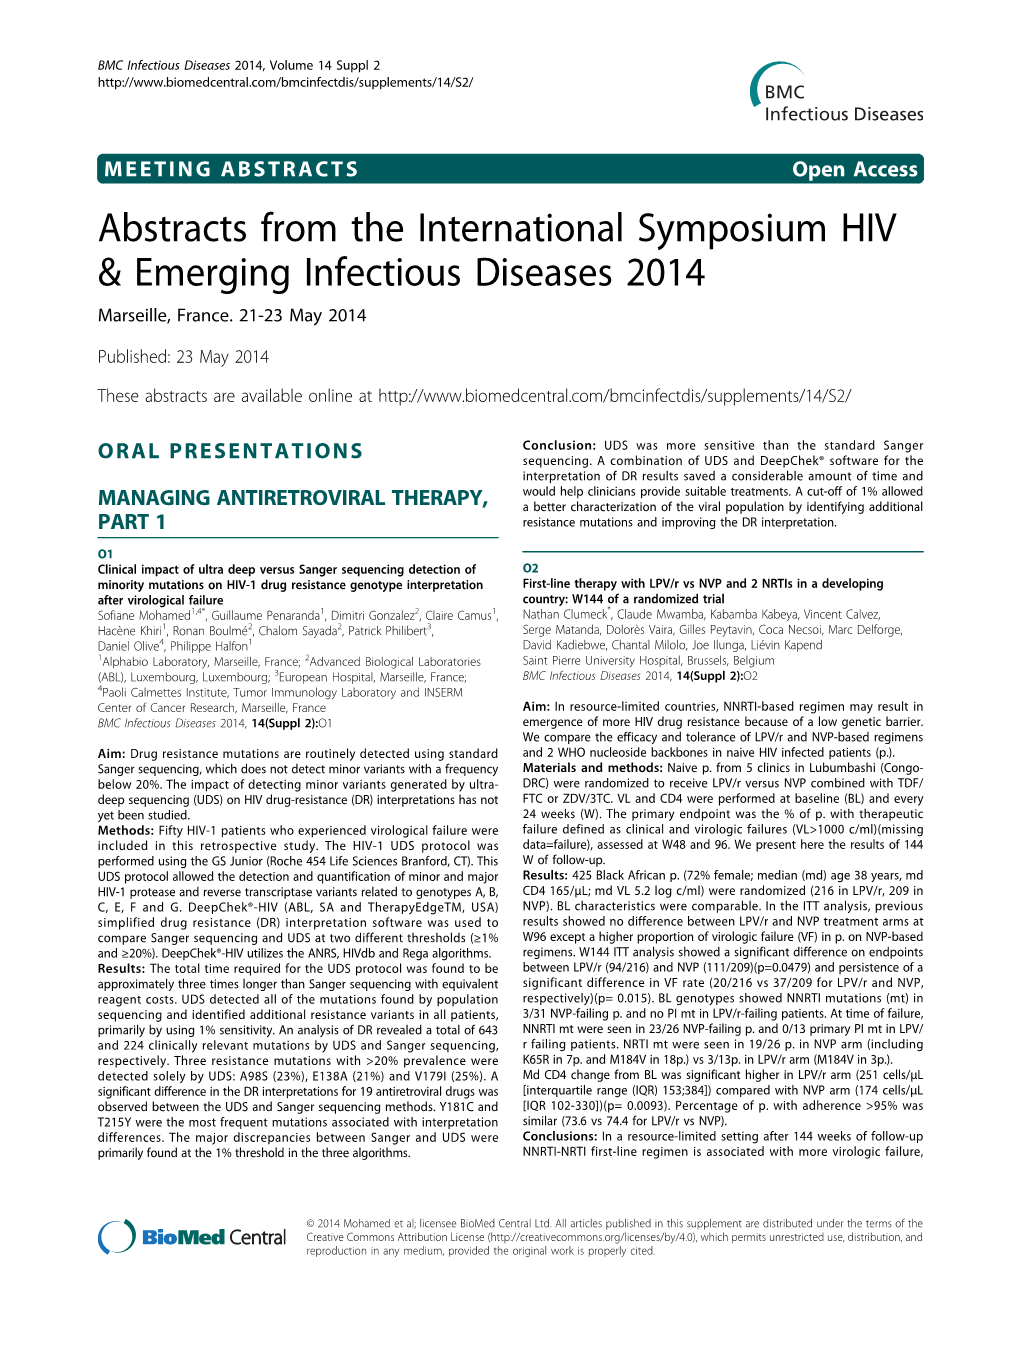 Abstracts from the International Symposium HIV & Emerging Infectious Diseases 2014 Marseille, France